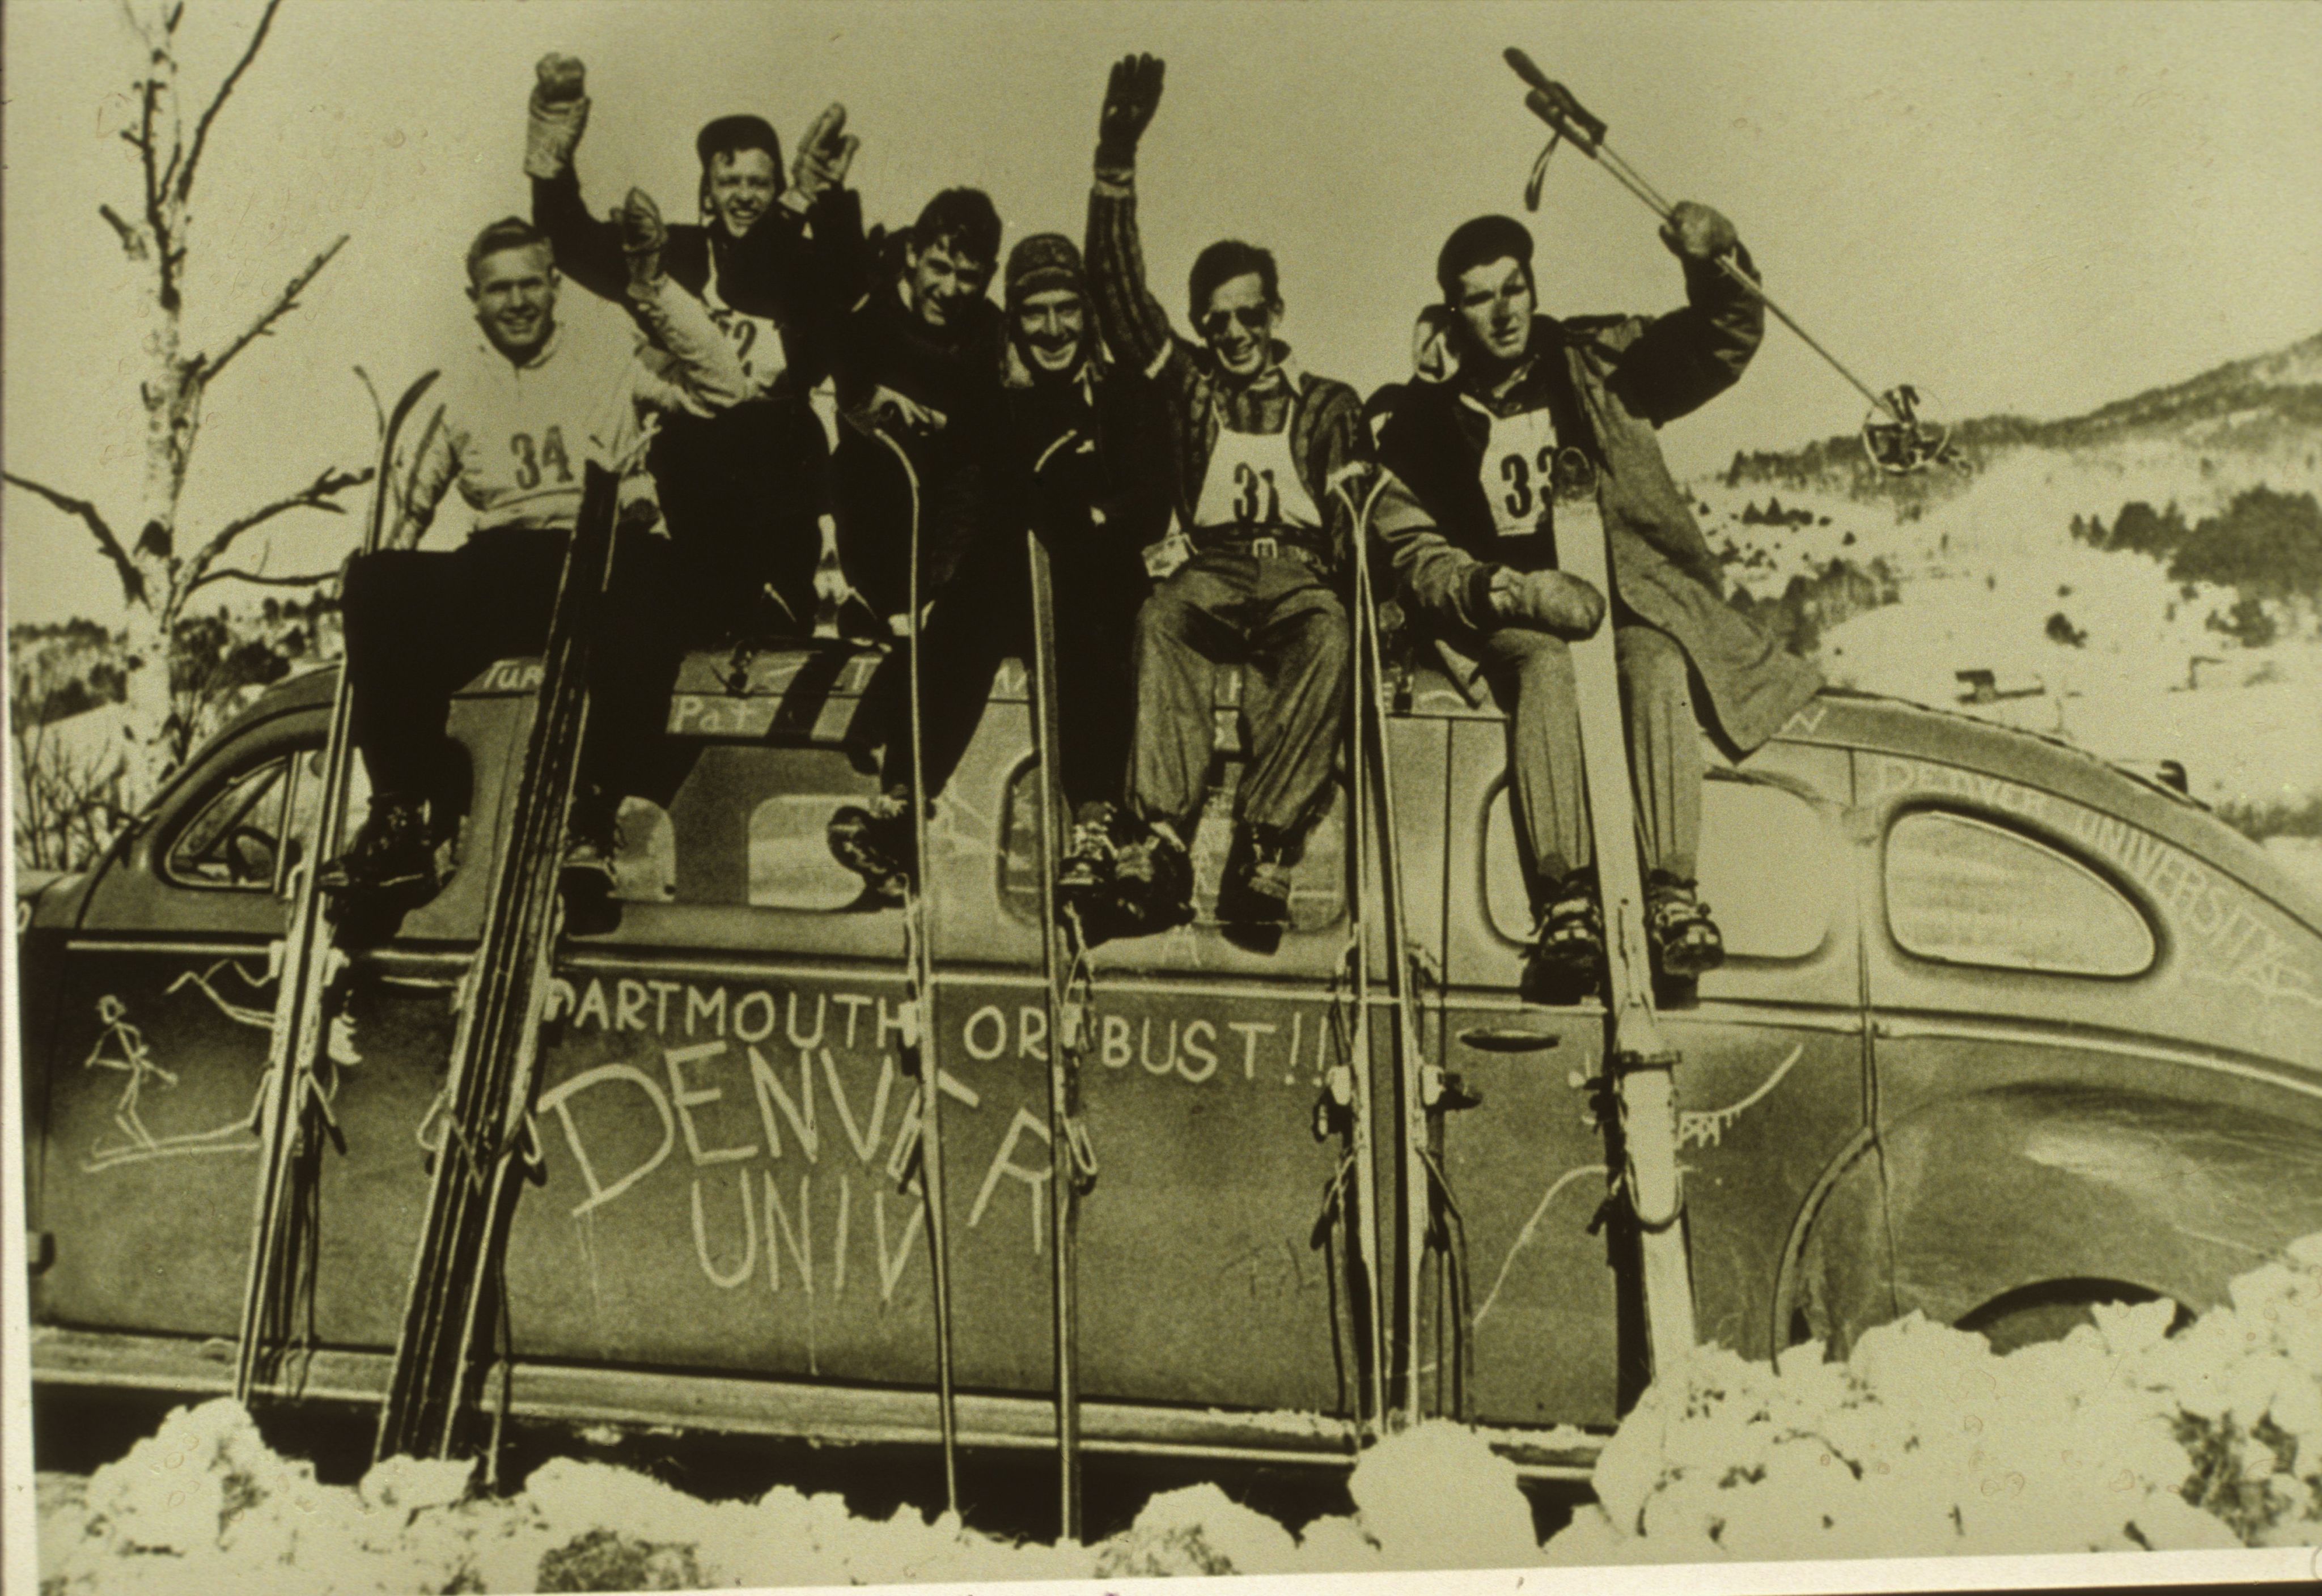 A vintage photo from the 1960's showing the DU ski team sitting on top of a car